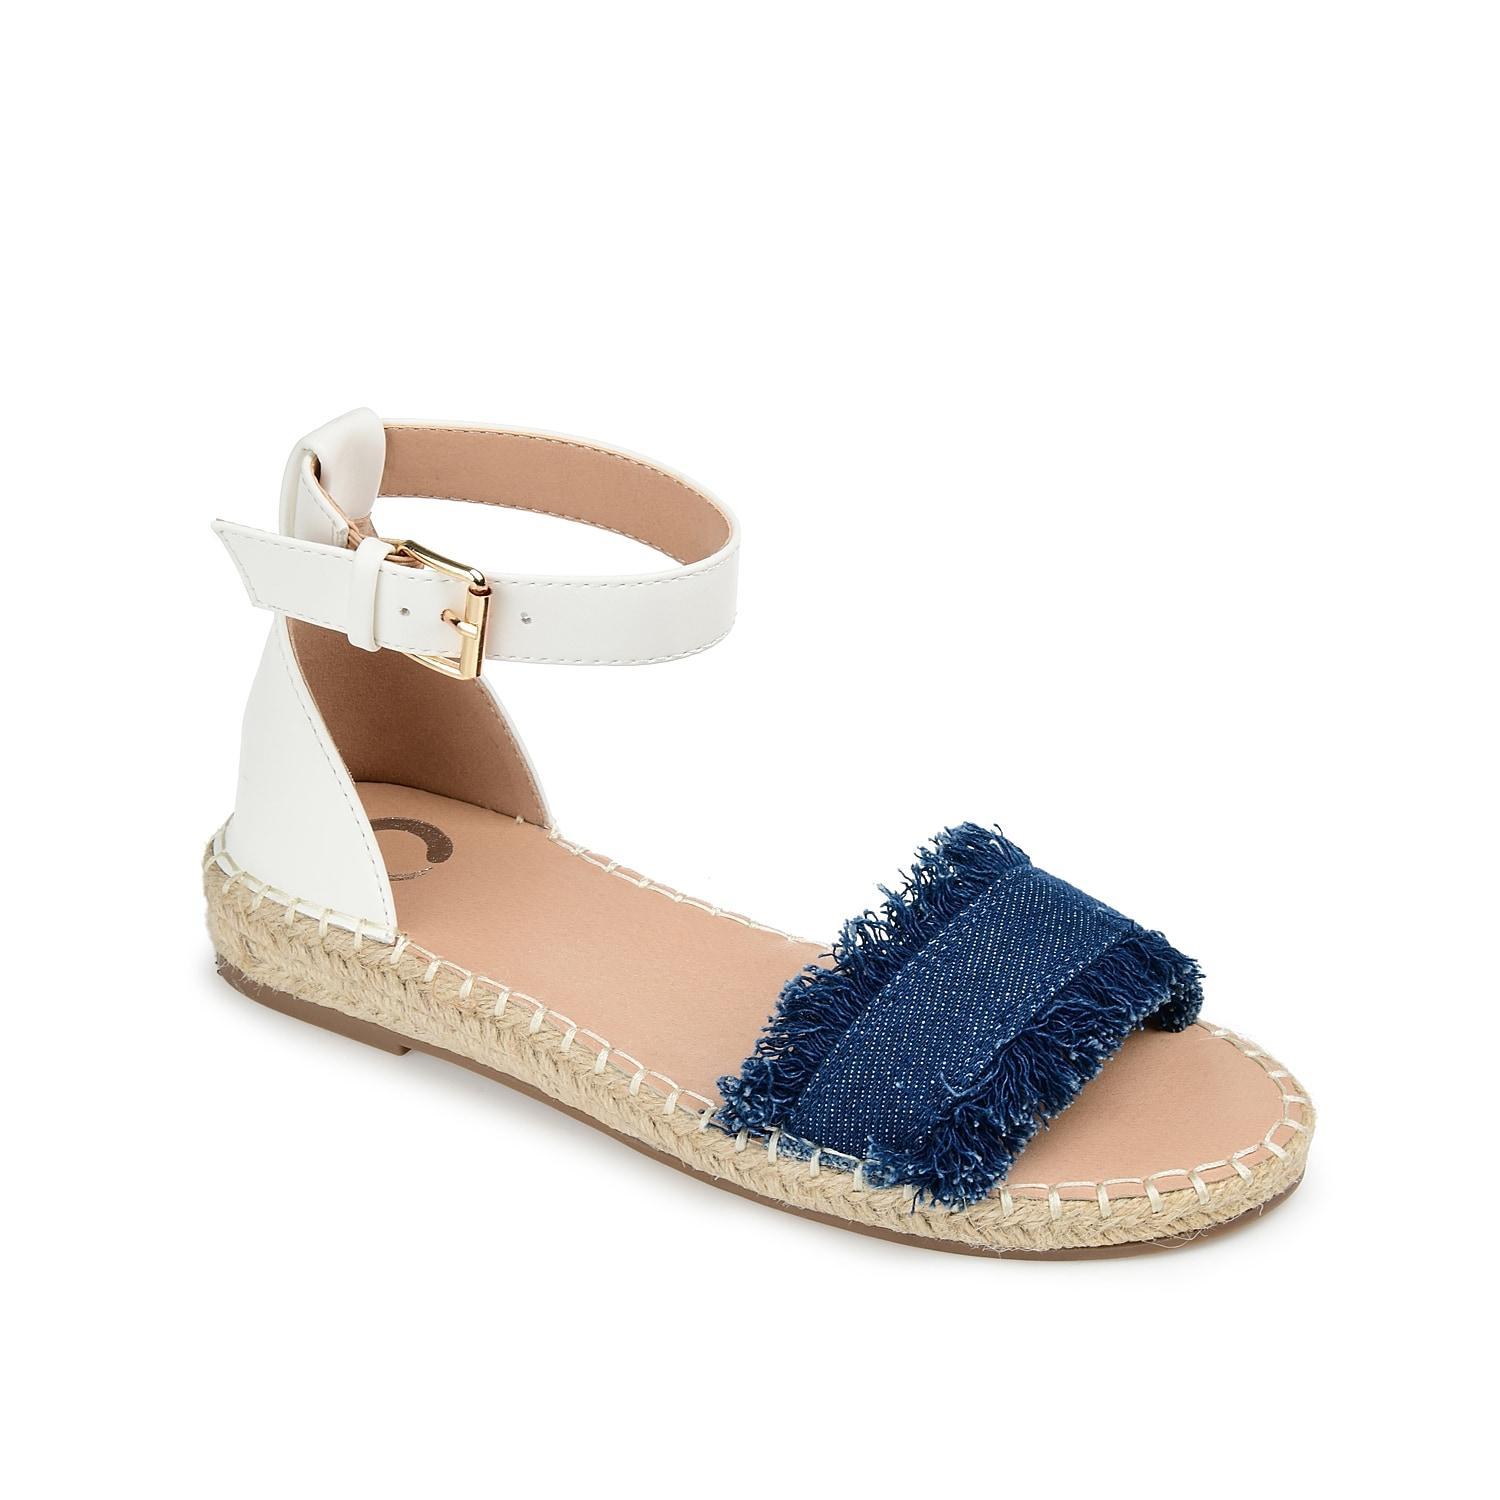 Journee Collection Tristeen Womens Espadrille Sandals Blue Product Image